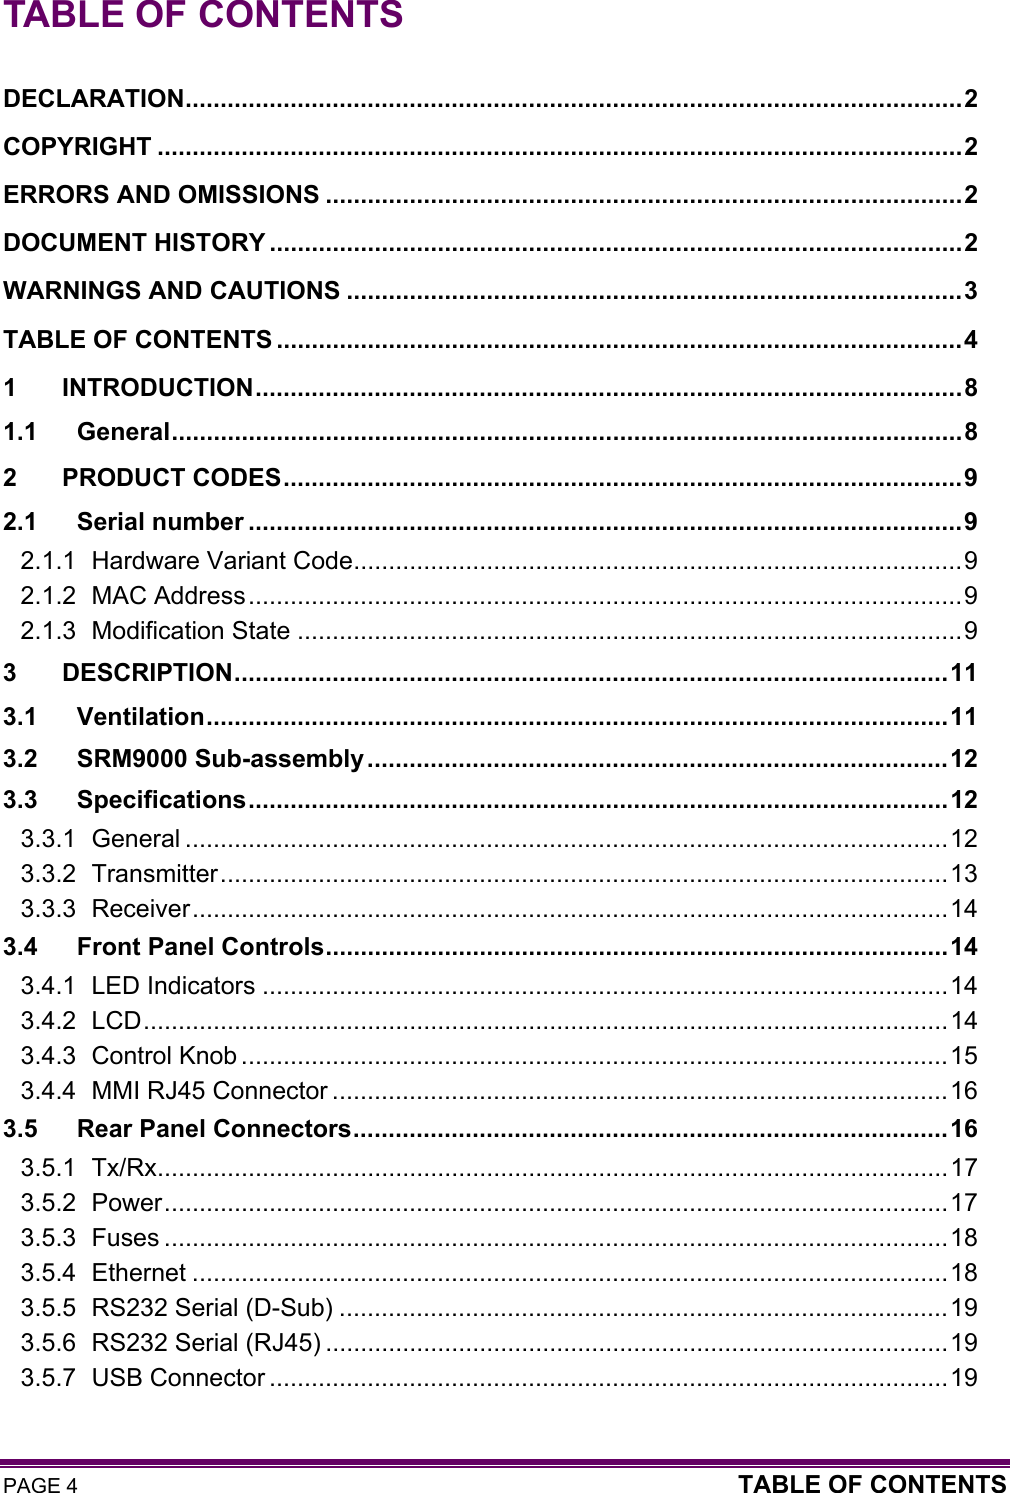 PAGE 4  TABLE OF CONTENTS  TABLE OF CONTENTS  DECLARATION...............................................................................................................2 COPYRIGHT ...................................................................................................................2 ERRORS AND OMISSIONS ...........................................................................................2 DOCUMENT HISTORY ...................................................................................................2 WARNINGS AND CAUTIONS ........................................................................................3 TABLE OF CONTENTS ..................................................................................................4 1 INTRODUCTION.....................................................................................................8 1.1 General.................................................................................................................8 2 PRODUCT CODES.................................................................................................9 2.1 Serial number ......................................................................................................9 2.1.1 Hardware Variant Code.......................................................................................9 2.1.2 MAC Address......................................................................................................9 2.1.3 Modification State ...............................................................................................9 3 DESCRIPTION......................................................................................................11 3.1 Ventilation..........................................................................................................11 3.2 SRM9000 Sub-assembly...................................................................................12 3.3 Specifications....................................................................................................12 3.3.1 General .............................................................................................................12 3.3.2 Transmitter........................................................................................................13 3.3.3 Receiver............................................................................................................14 3.4 Front Panel Controls.........................................................................................14 3.4.1 LED Indicators ..................................................................................................14 3.4.2 LCD...................................................................................................................14 3.4.3 Control Knob .....................................................................................................15 3.4.4 MMI RJ45 Connector ........................................................................................16 3.5 Rear Panel Connectors.....................................................................................16 3.5.1 Tx/Rx.................................................................................................................17 3.5.2 Power................................................................................................................17 3.5.3 Fuses ................................................................................................................18 3.5.4 Ethernet ............................................................................................................18 3.5.5 RS232 Serial (D-Sub) .......................................................................................19 3.5.6 RS232 Serial (RJ45) .........................................................................................19 3.5.7 USB Connector .................................................................................................19 